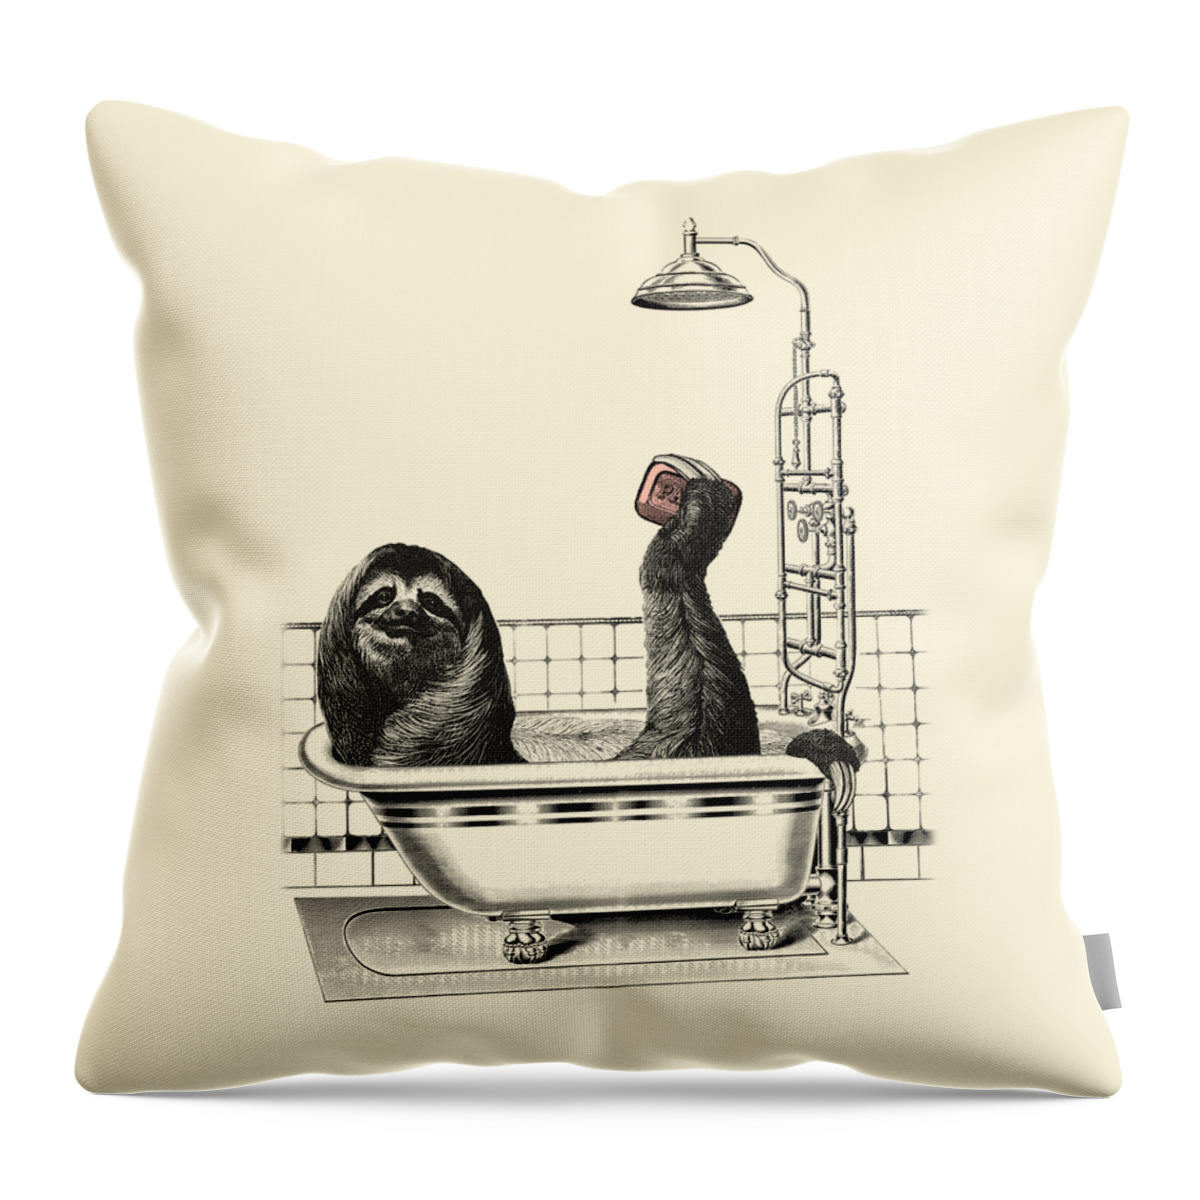 Sloth Throw Pillow featuring the digital art Sloth in bathtub taking a shower by Madame Memento